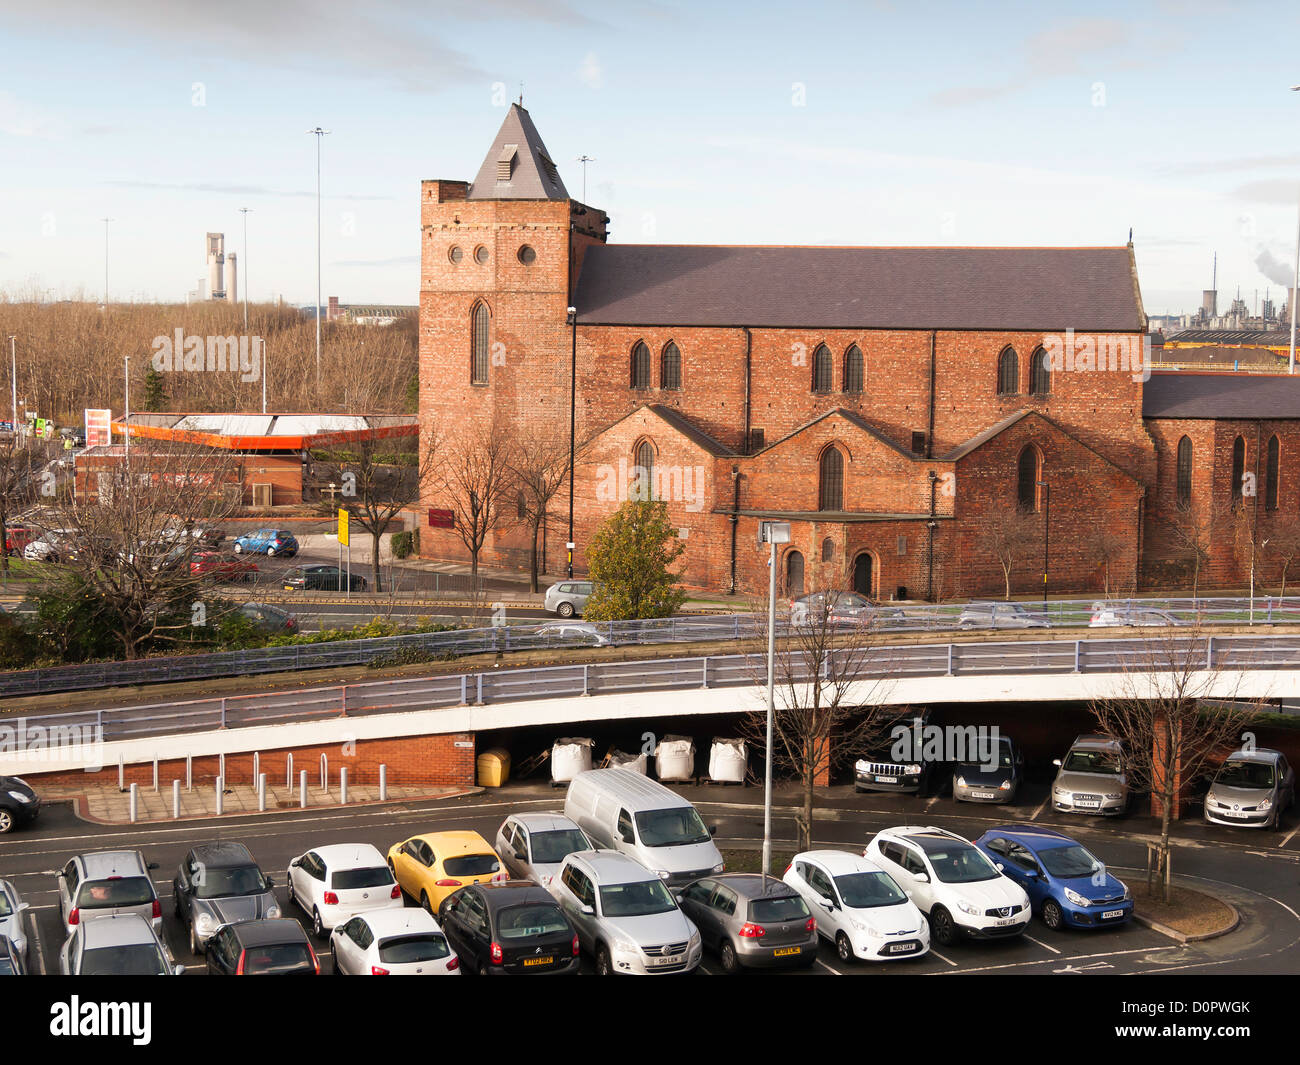 St. Columba’s Anglican church in Middlesbrough built 1902 in a residential area now isolated among car parks and busy roads Stock Photo